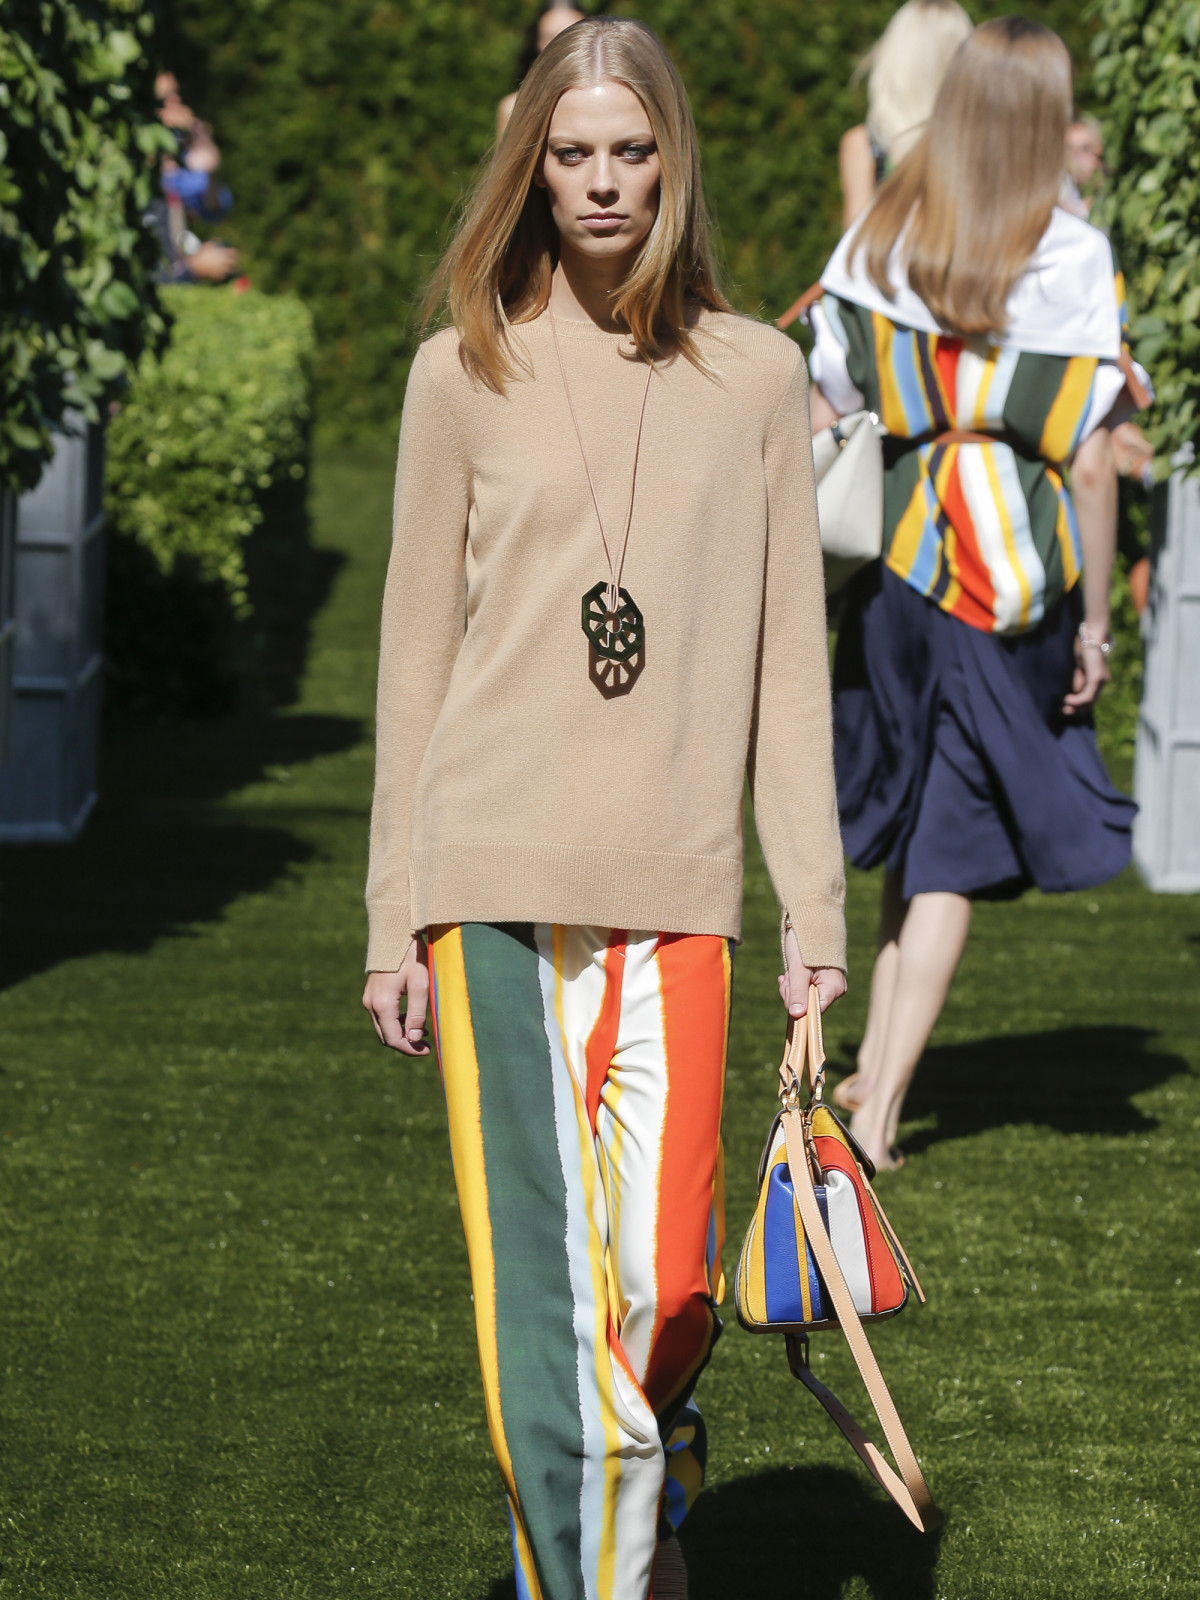 Tory Burch is beachy keen with casual collection for great outdoors ...